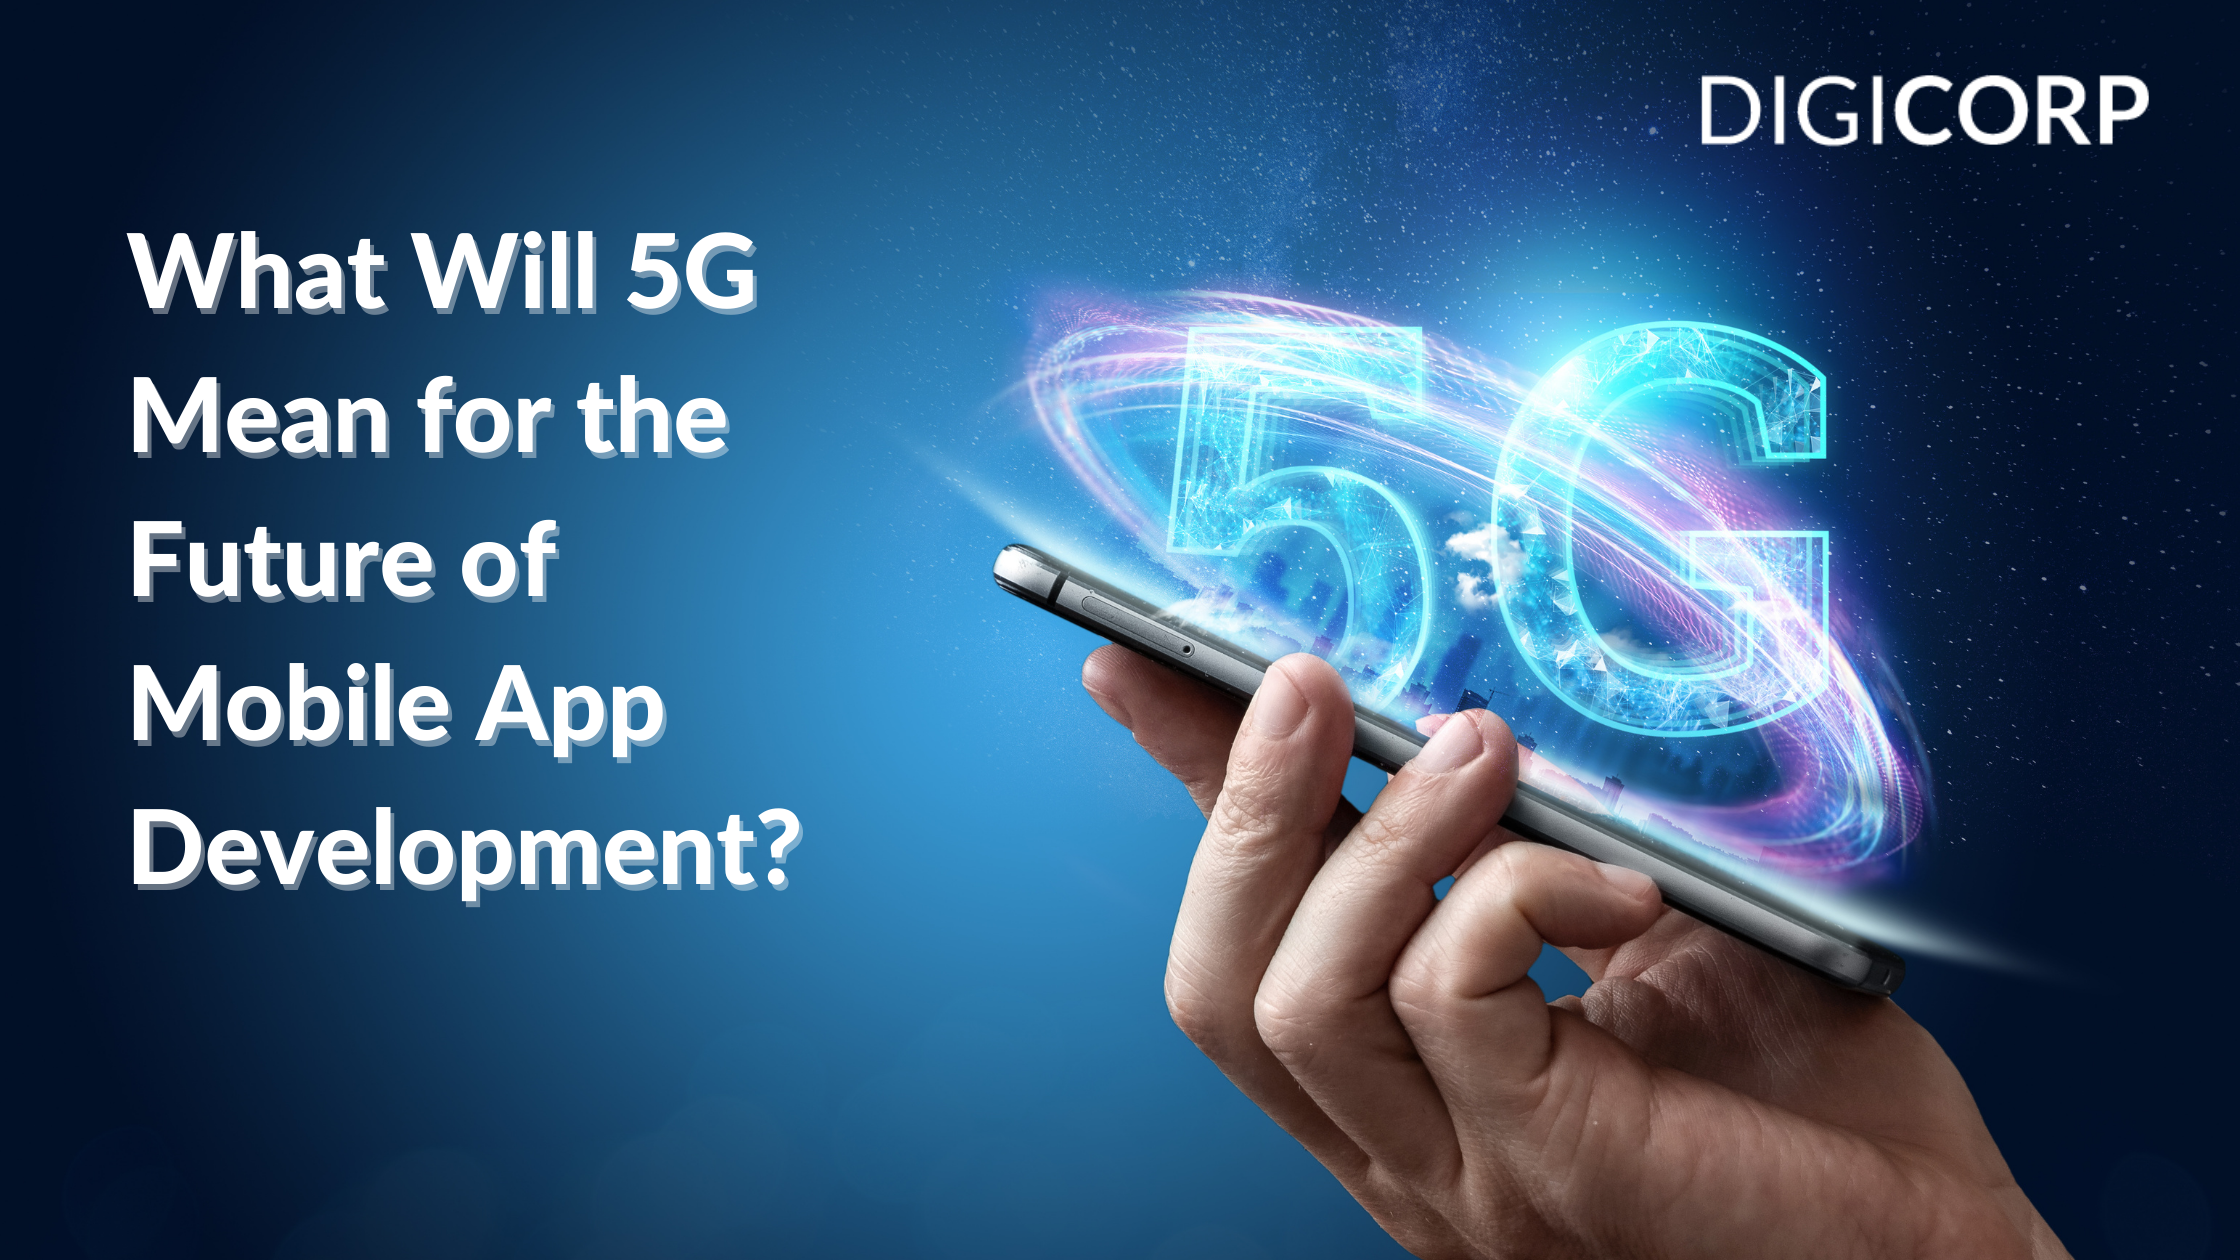 Digicorp’s Predictions for App Development in a Post-5G World